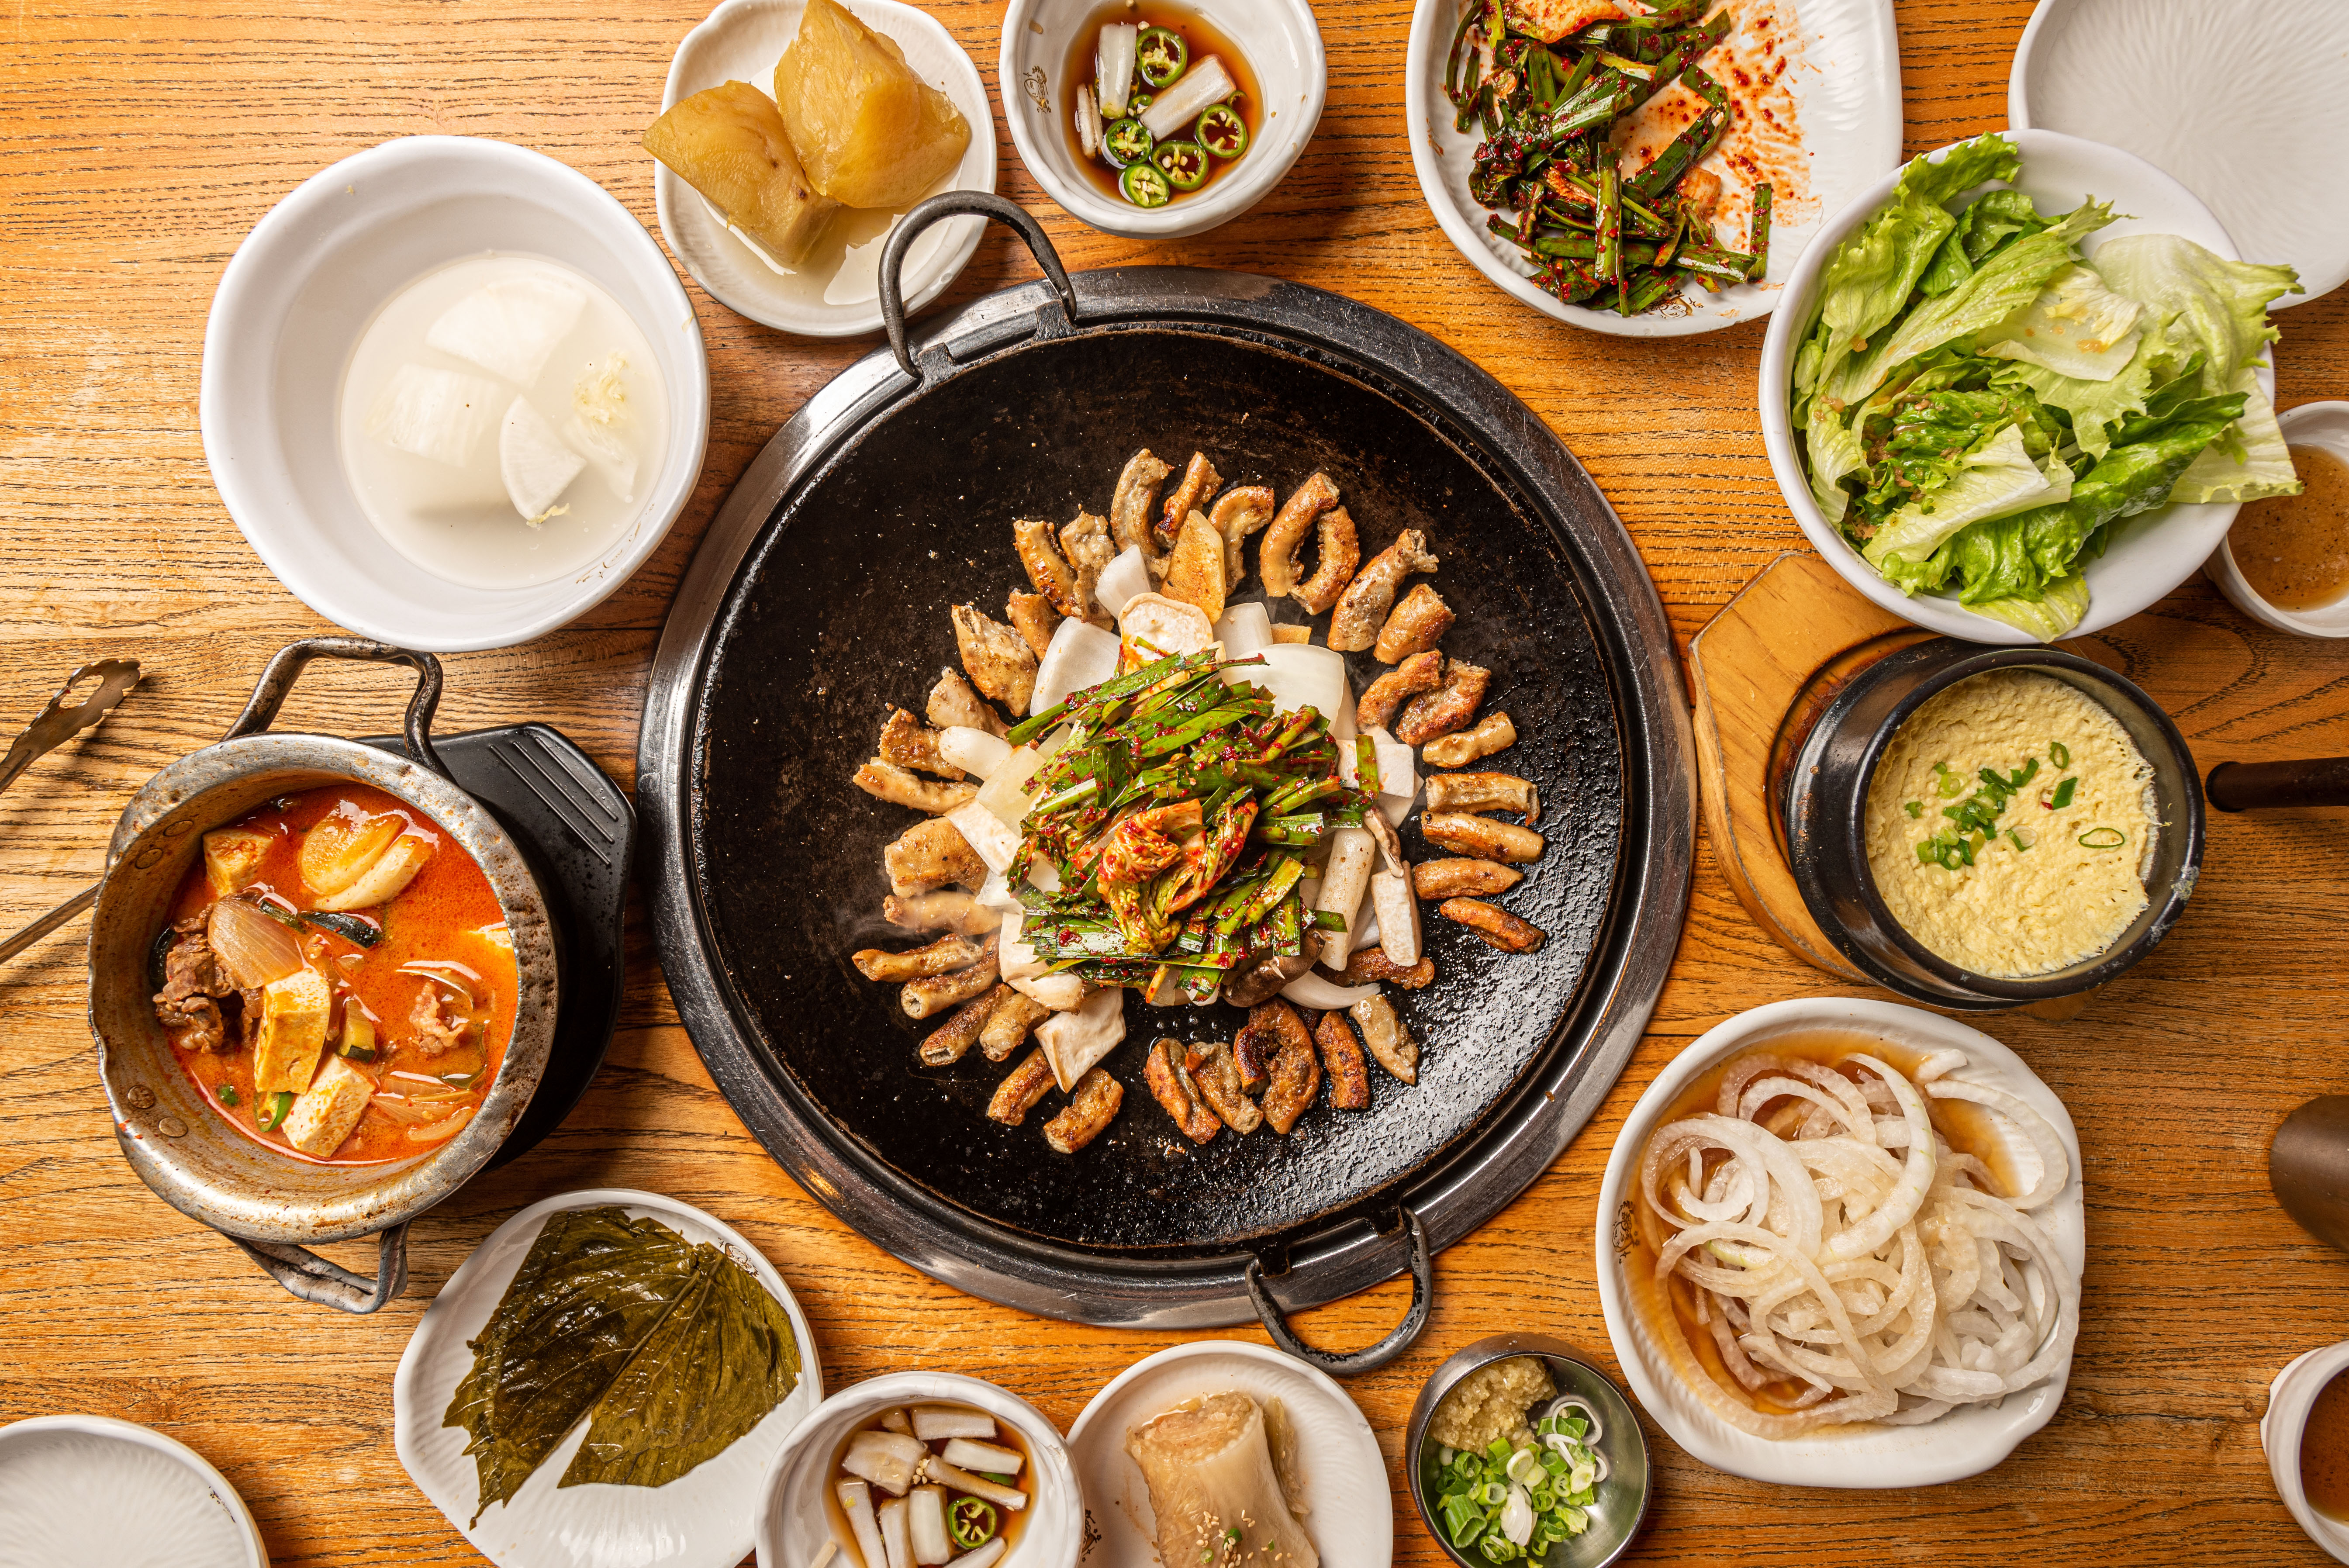 Offal surrounded by various banchan